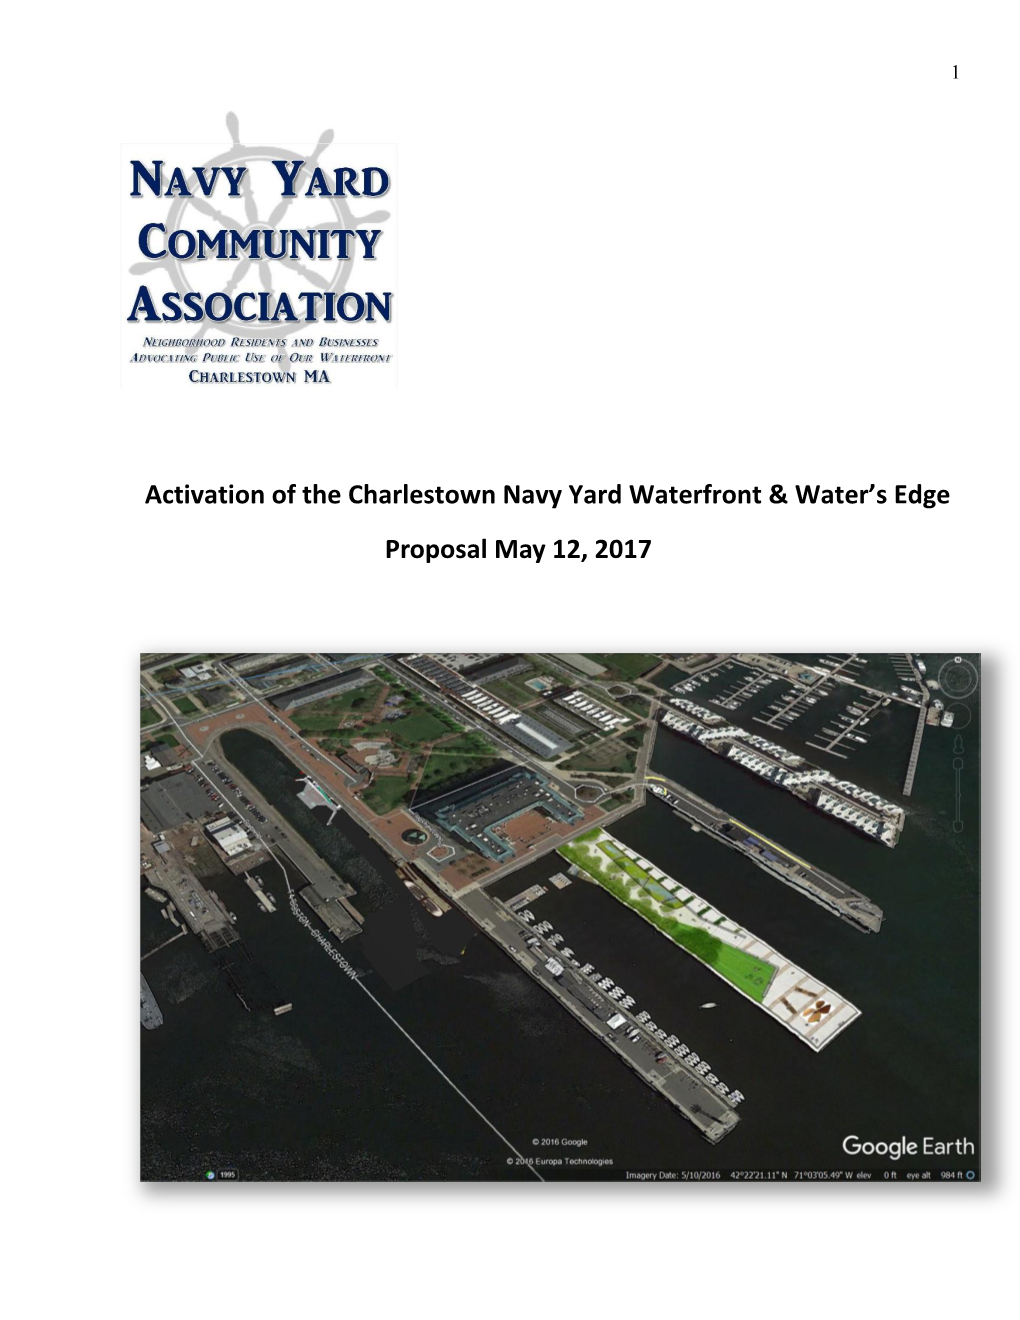 Activation of the Charlestown Navy Yard Waterfront & Water's Edge Proposal May 12, 2017